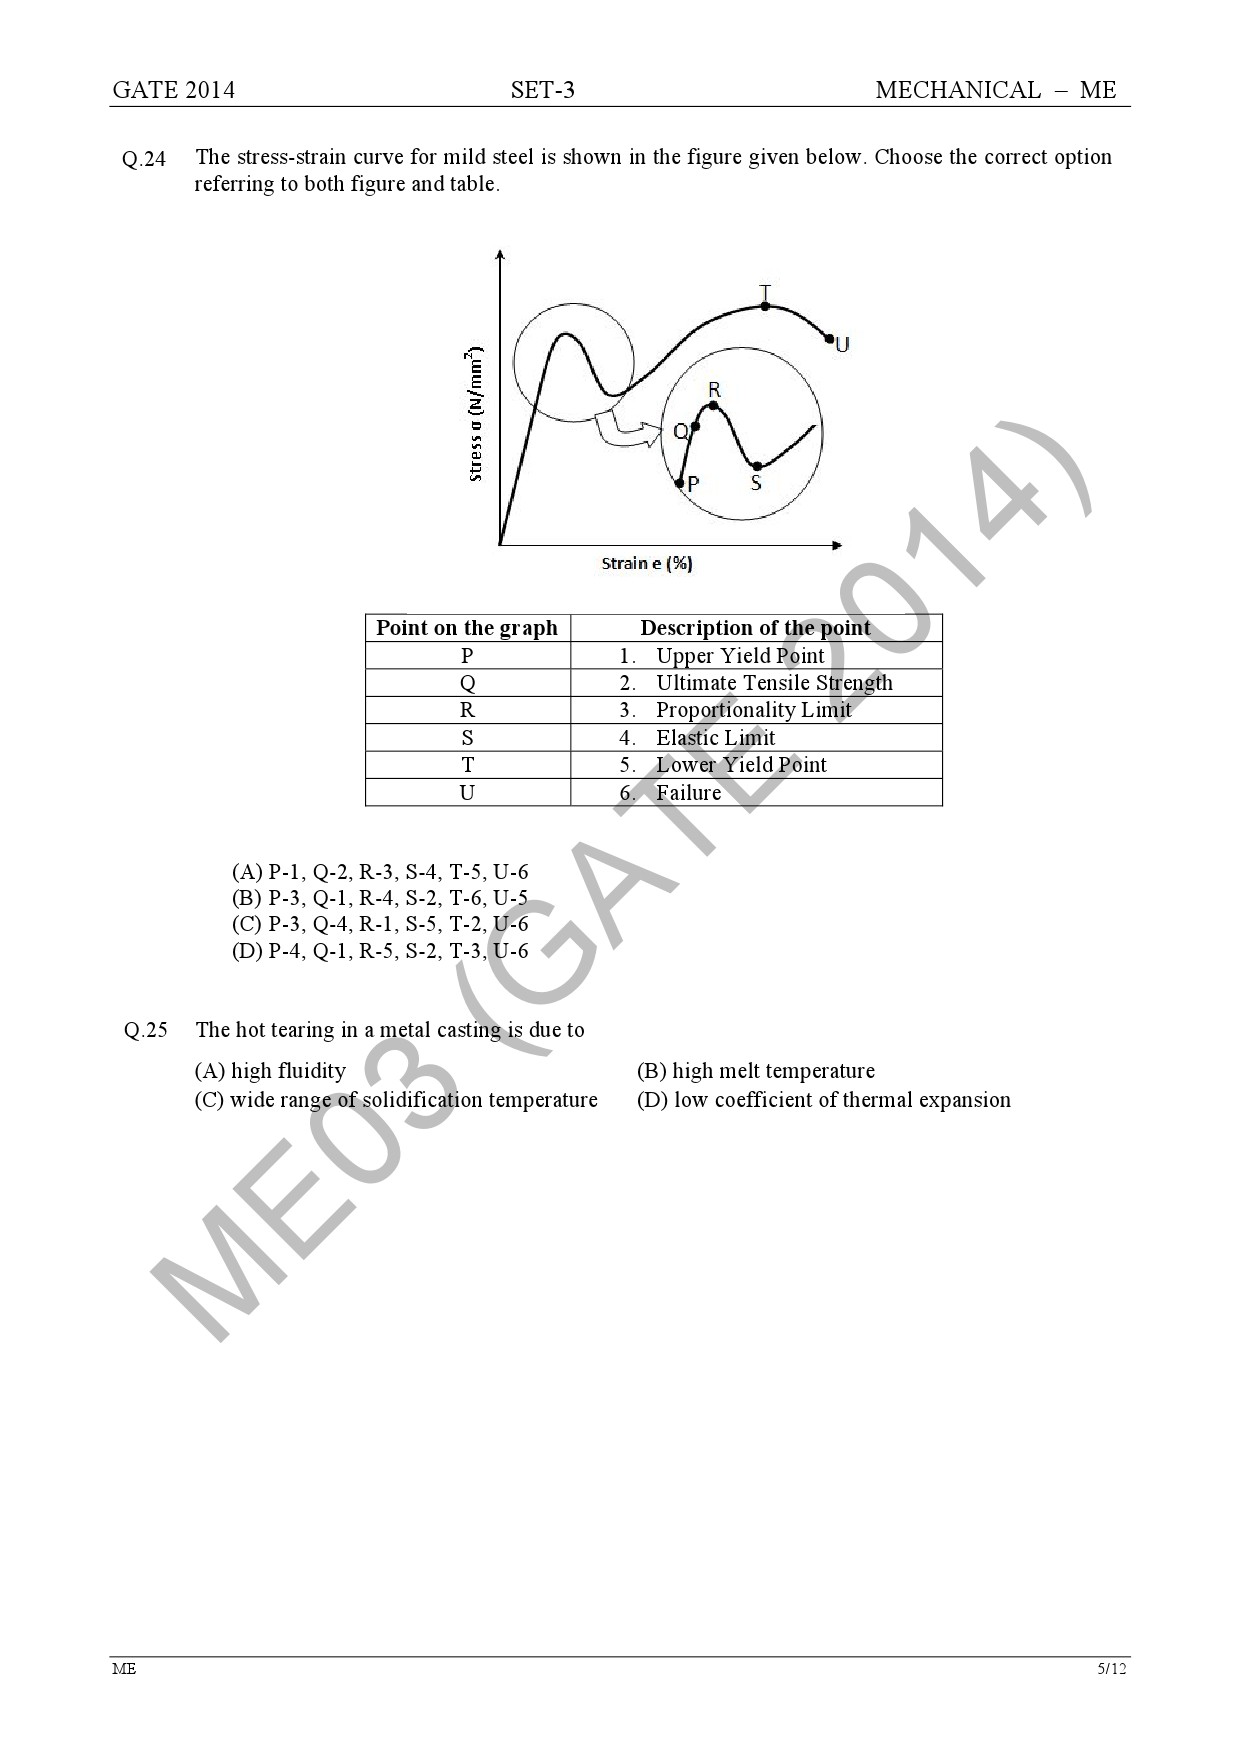 GATE Exam Question Paper 2014 Mechanical Engineering Set 3 12